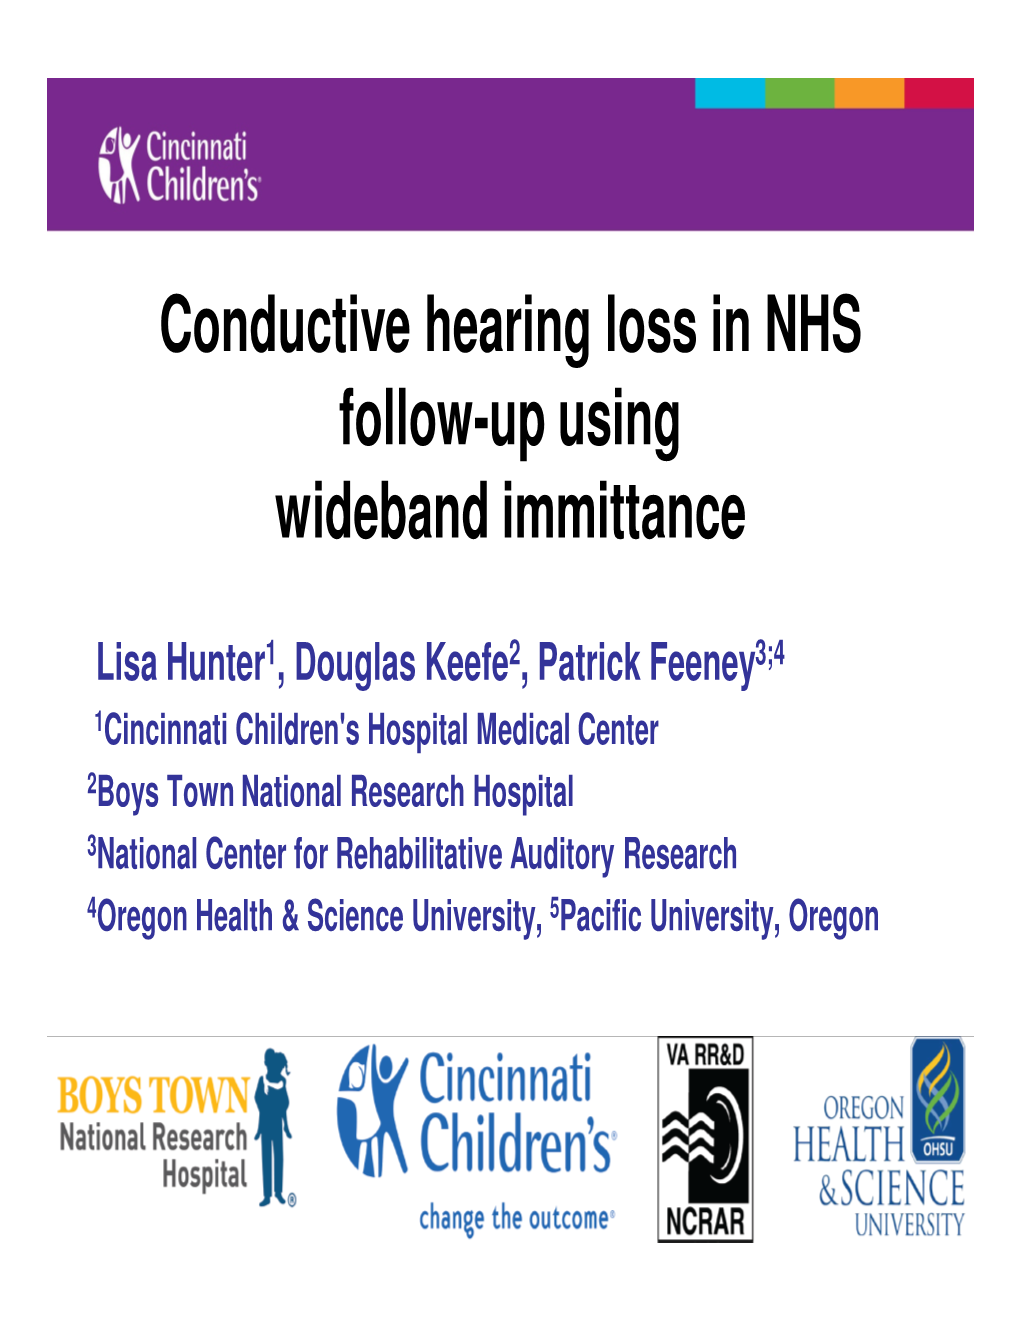 Conductive Hearing Loss in NHS Follow-Up Using Wideband Immittance